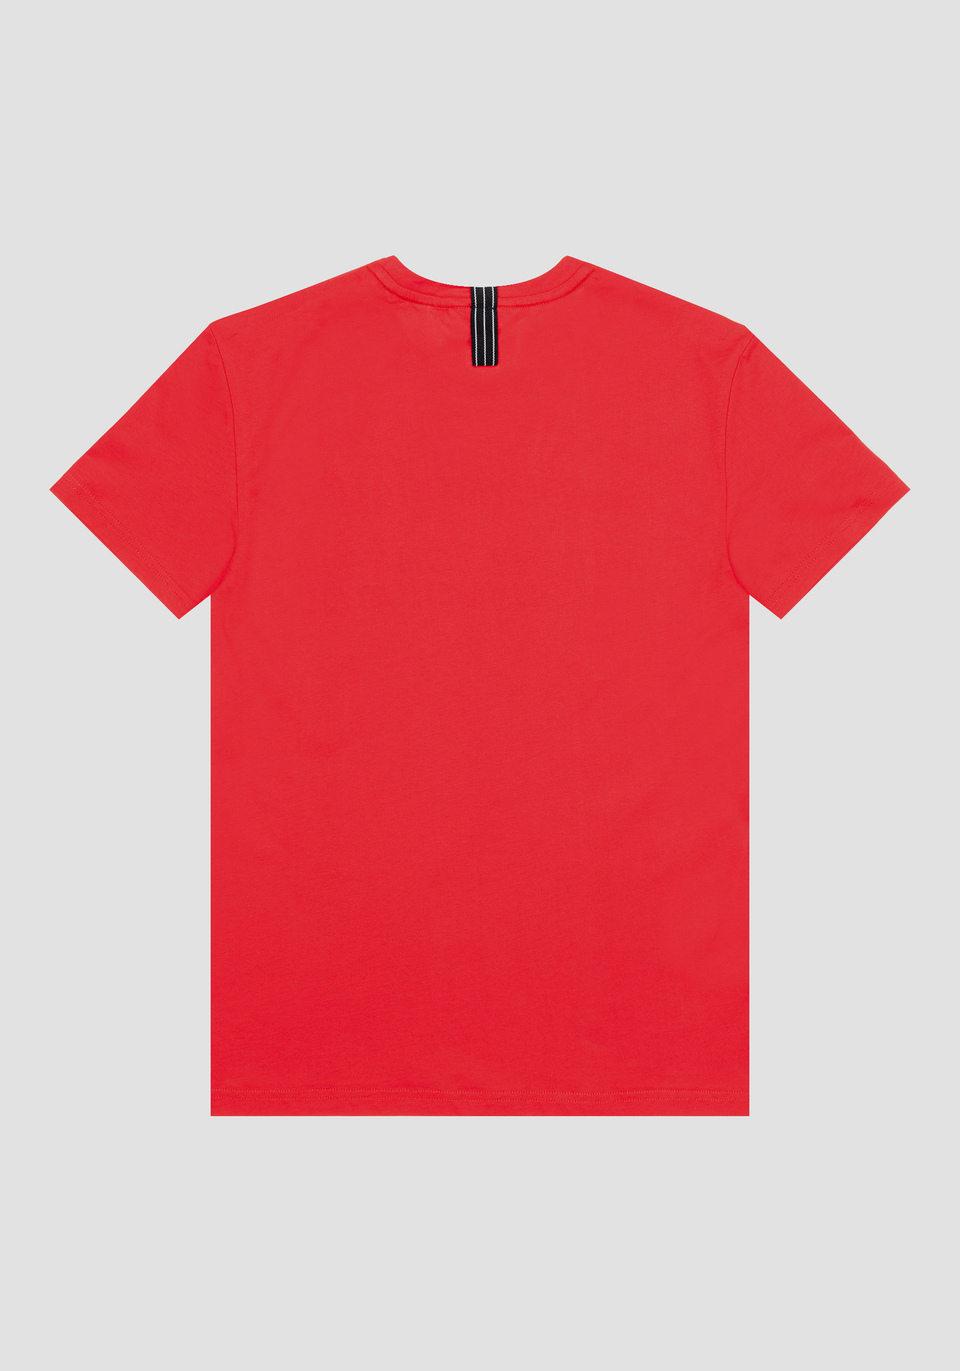 SLIM FIT T-SHIRT IN SOFT COTTON WITH PRINT - Antony Morato Online Shop